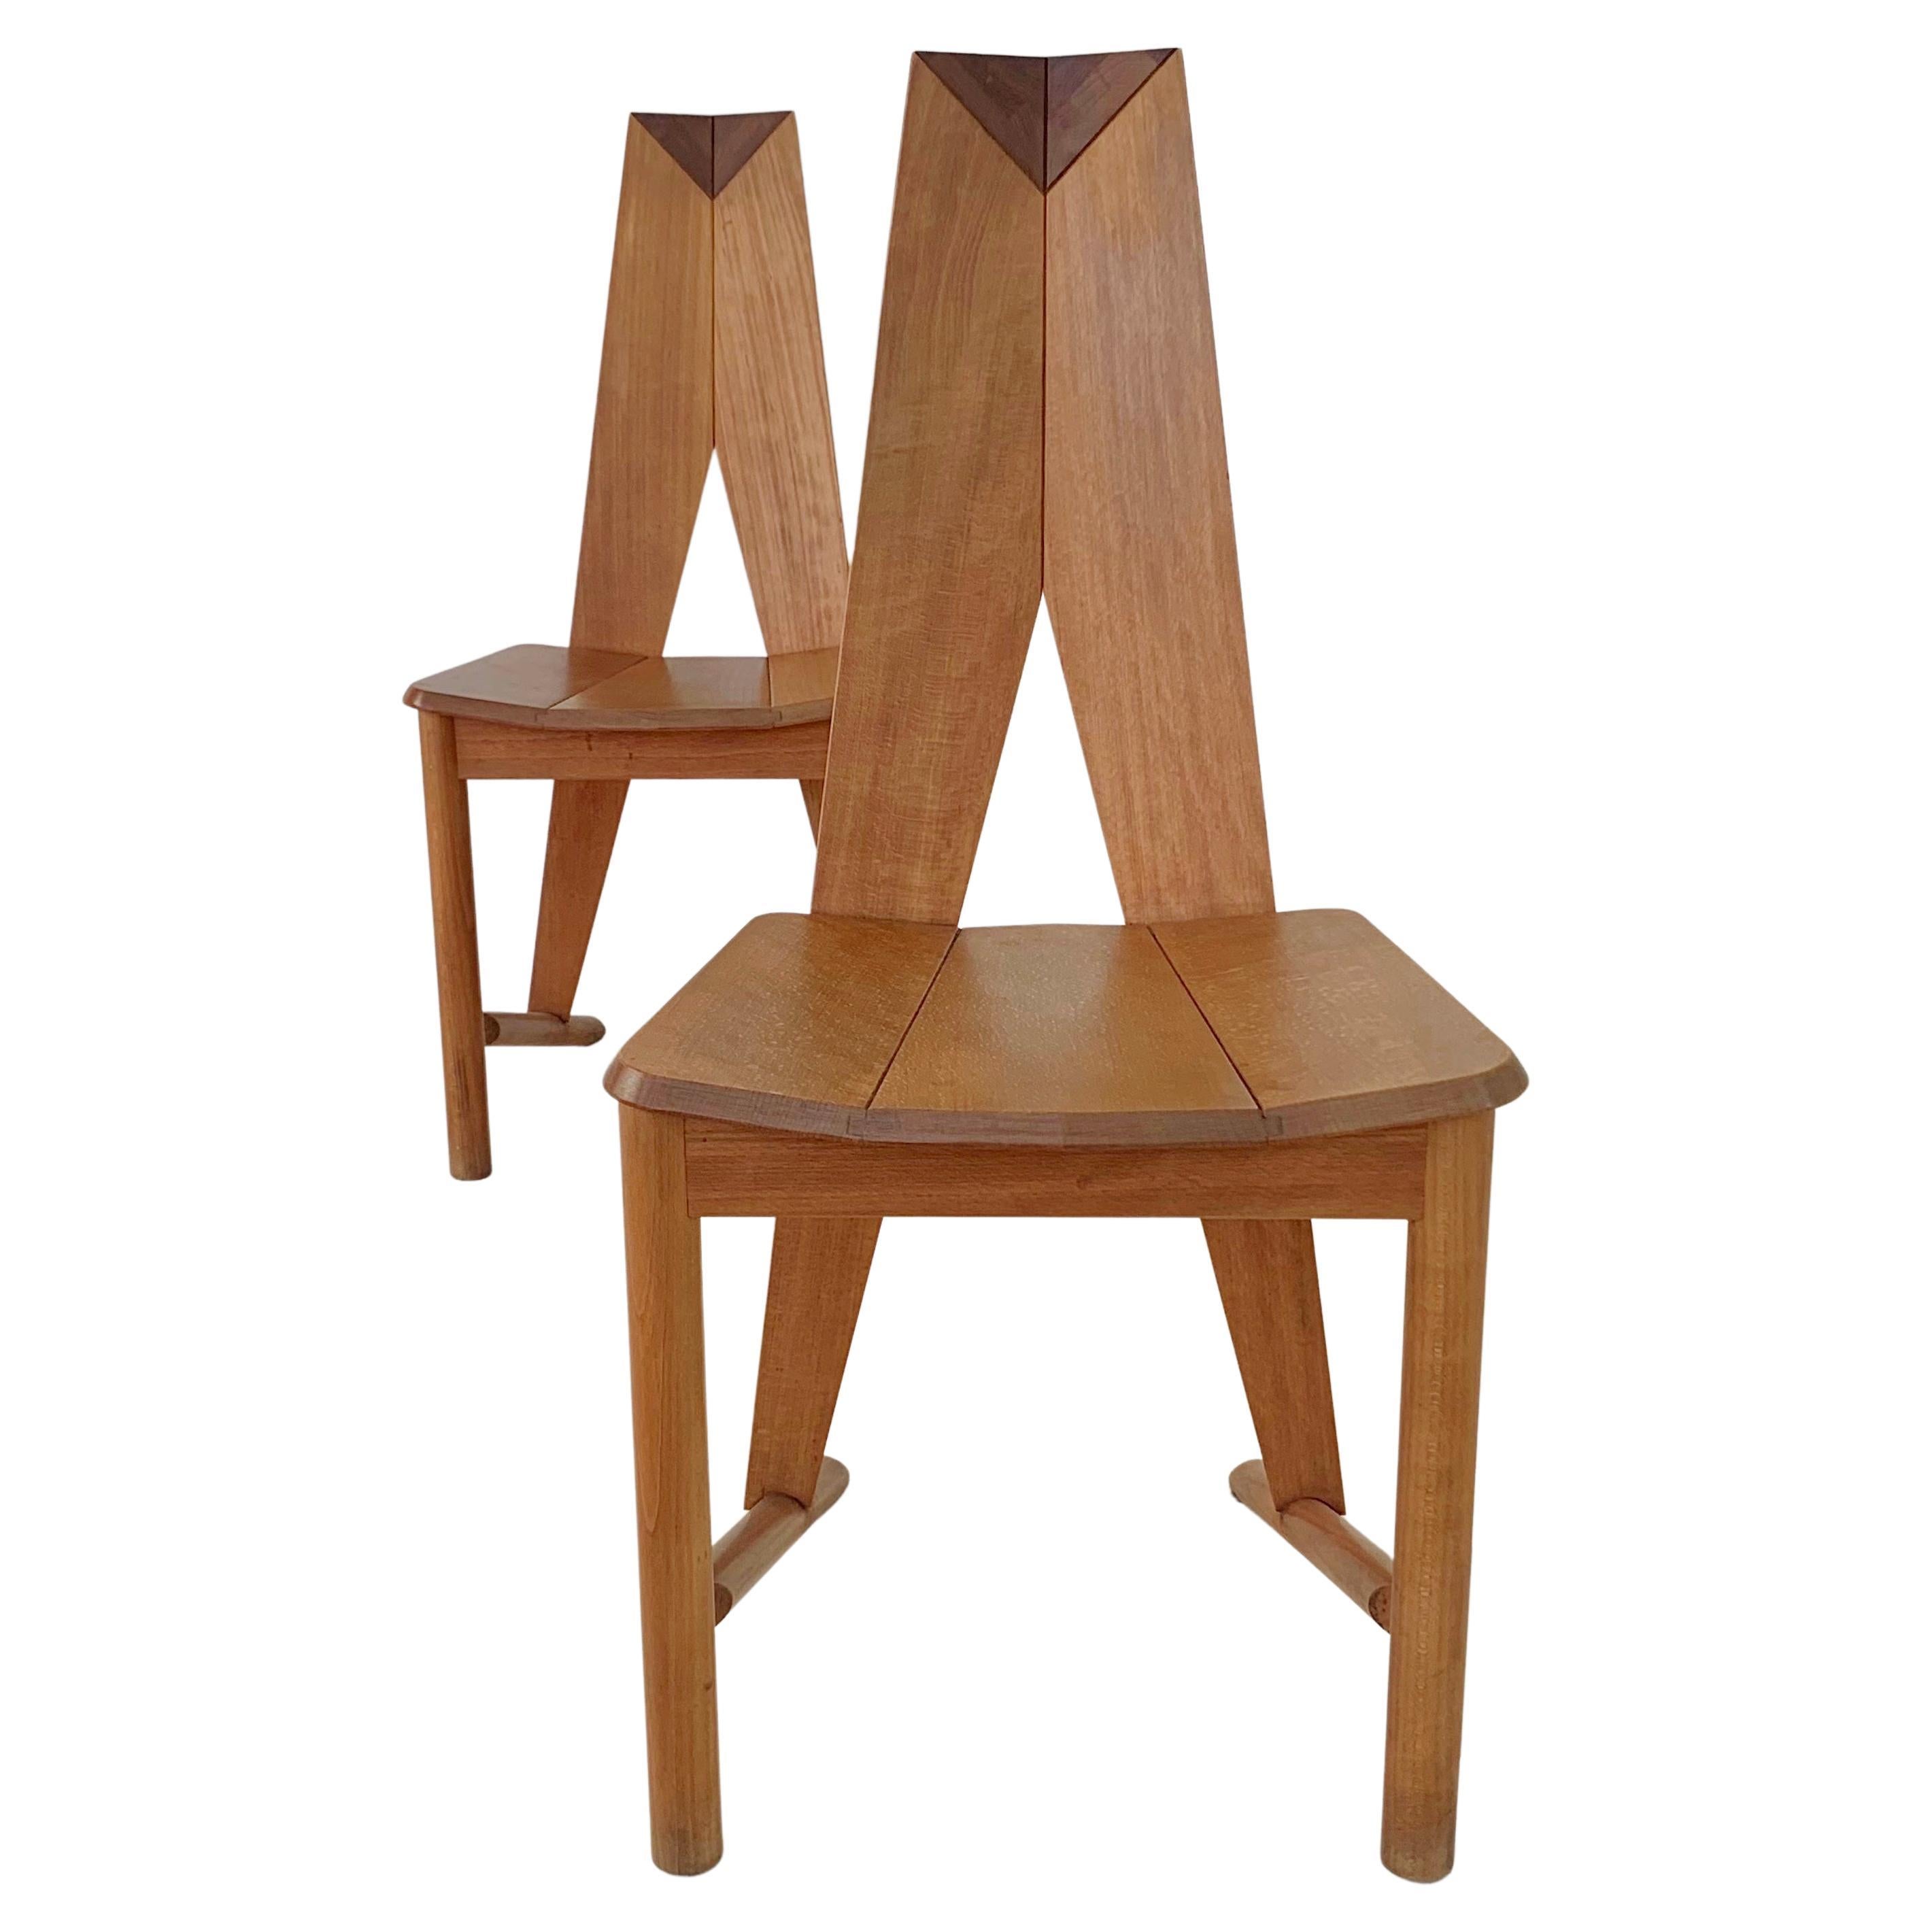 Pair of dining chairs for Seltz, France, circa 1980.
Solid beech.
Dimensions: 95 cm H, 46 cm W, 55 cm D, seat height: 45 cm.
Good original condition.
Another pair available.
All purchases are covered by our Buyer Protection Guarantee.
This item can